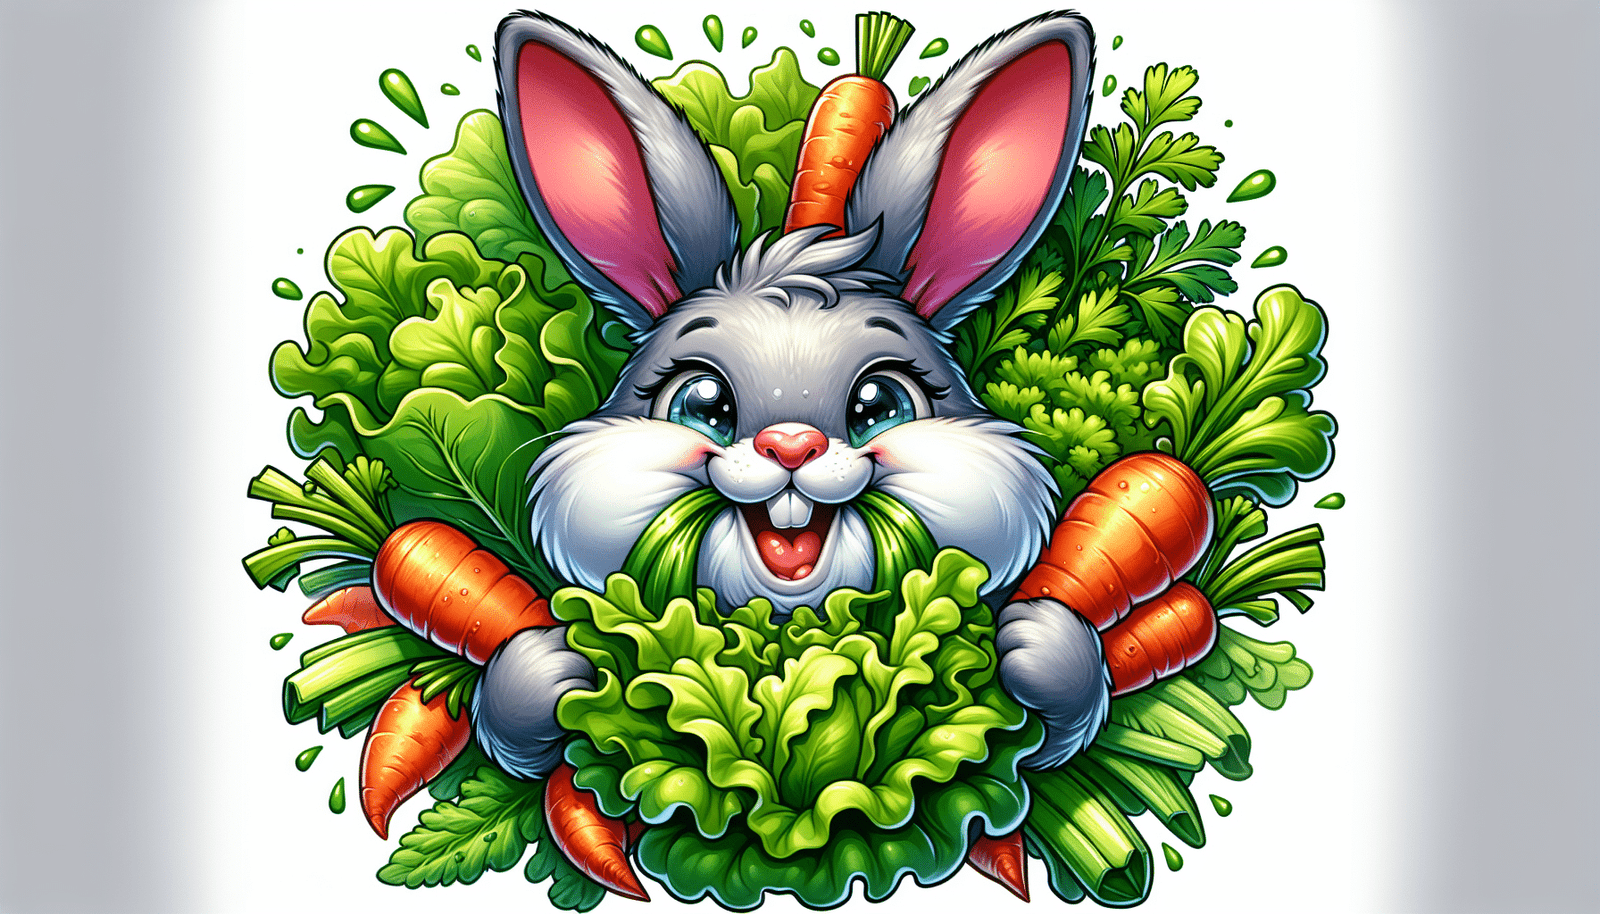 Cartoon image of a rabbit happily eating leafy greens